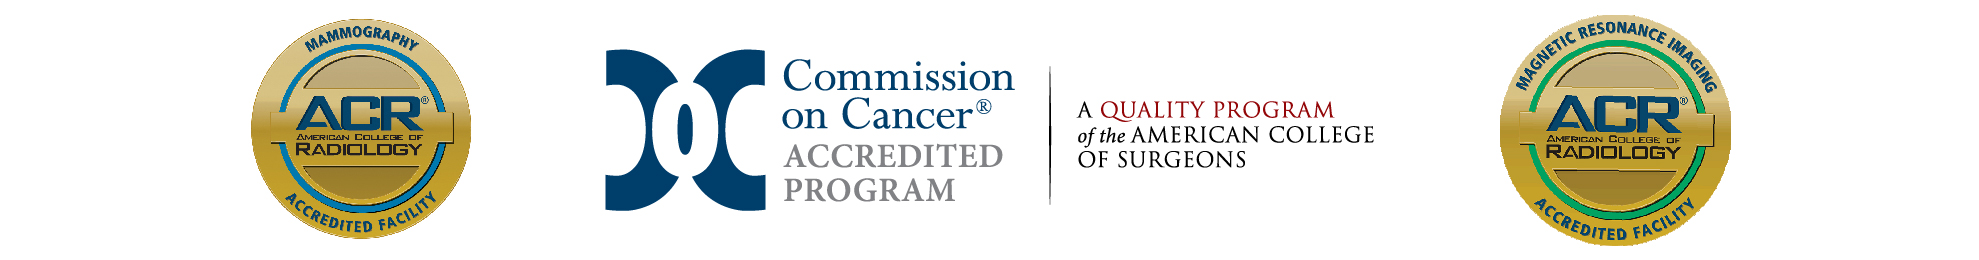 American College of Radiology and Commission on Cancer accreditation logos